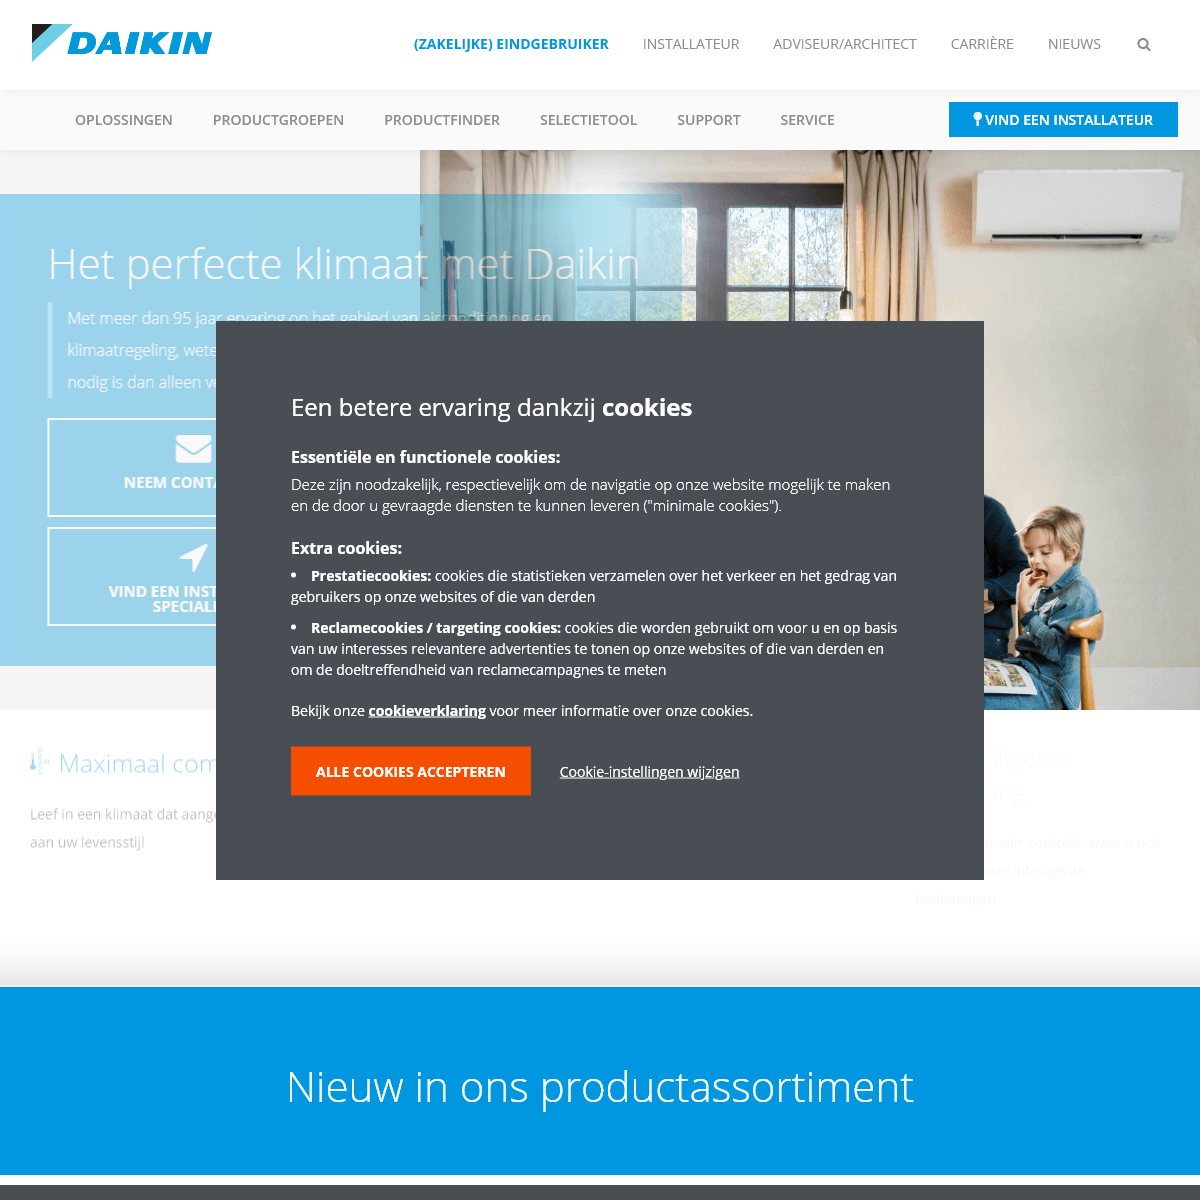 A complete backup of daikin.nl